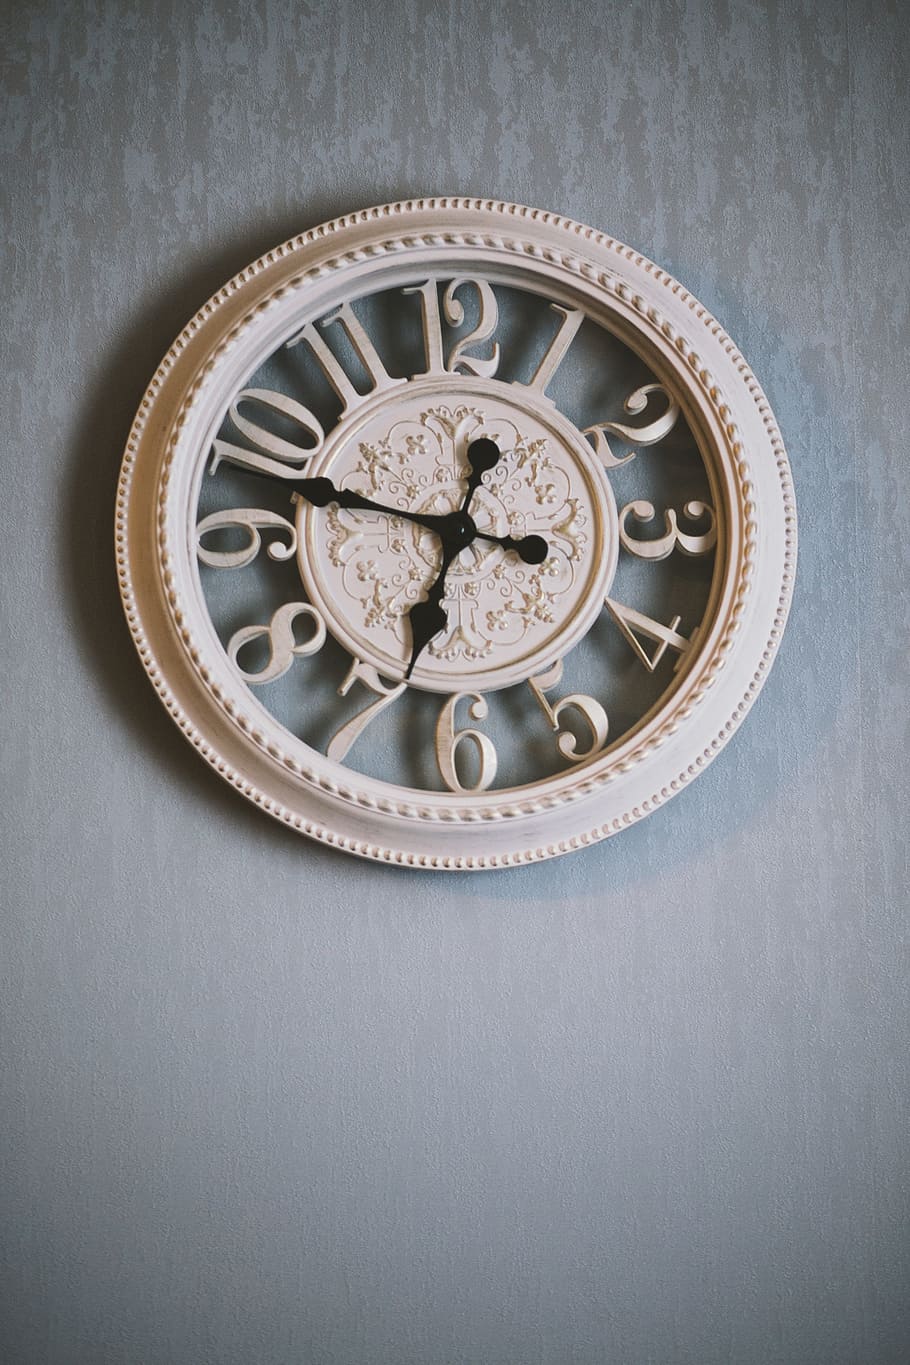 contemporay, wall, clock, time, antique, hands, retro, furniture, style, indoors